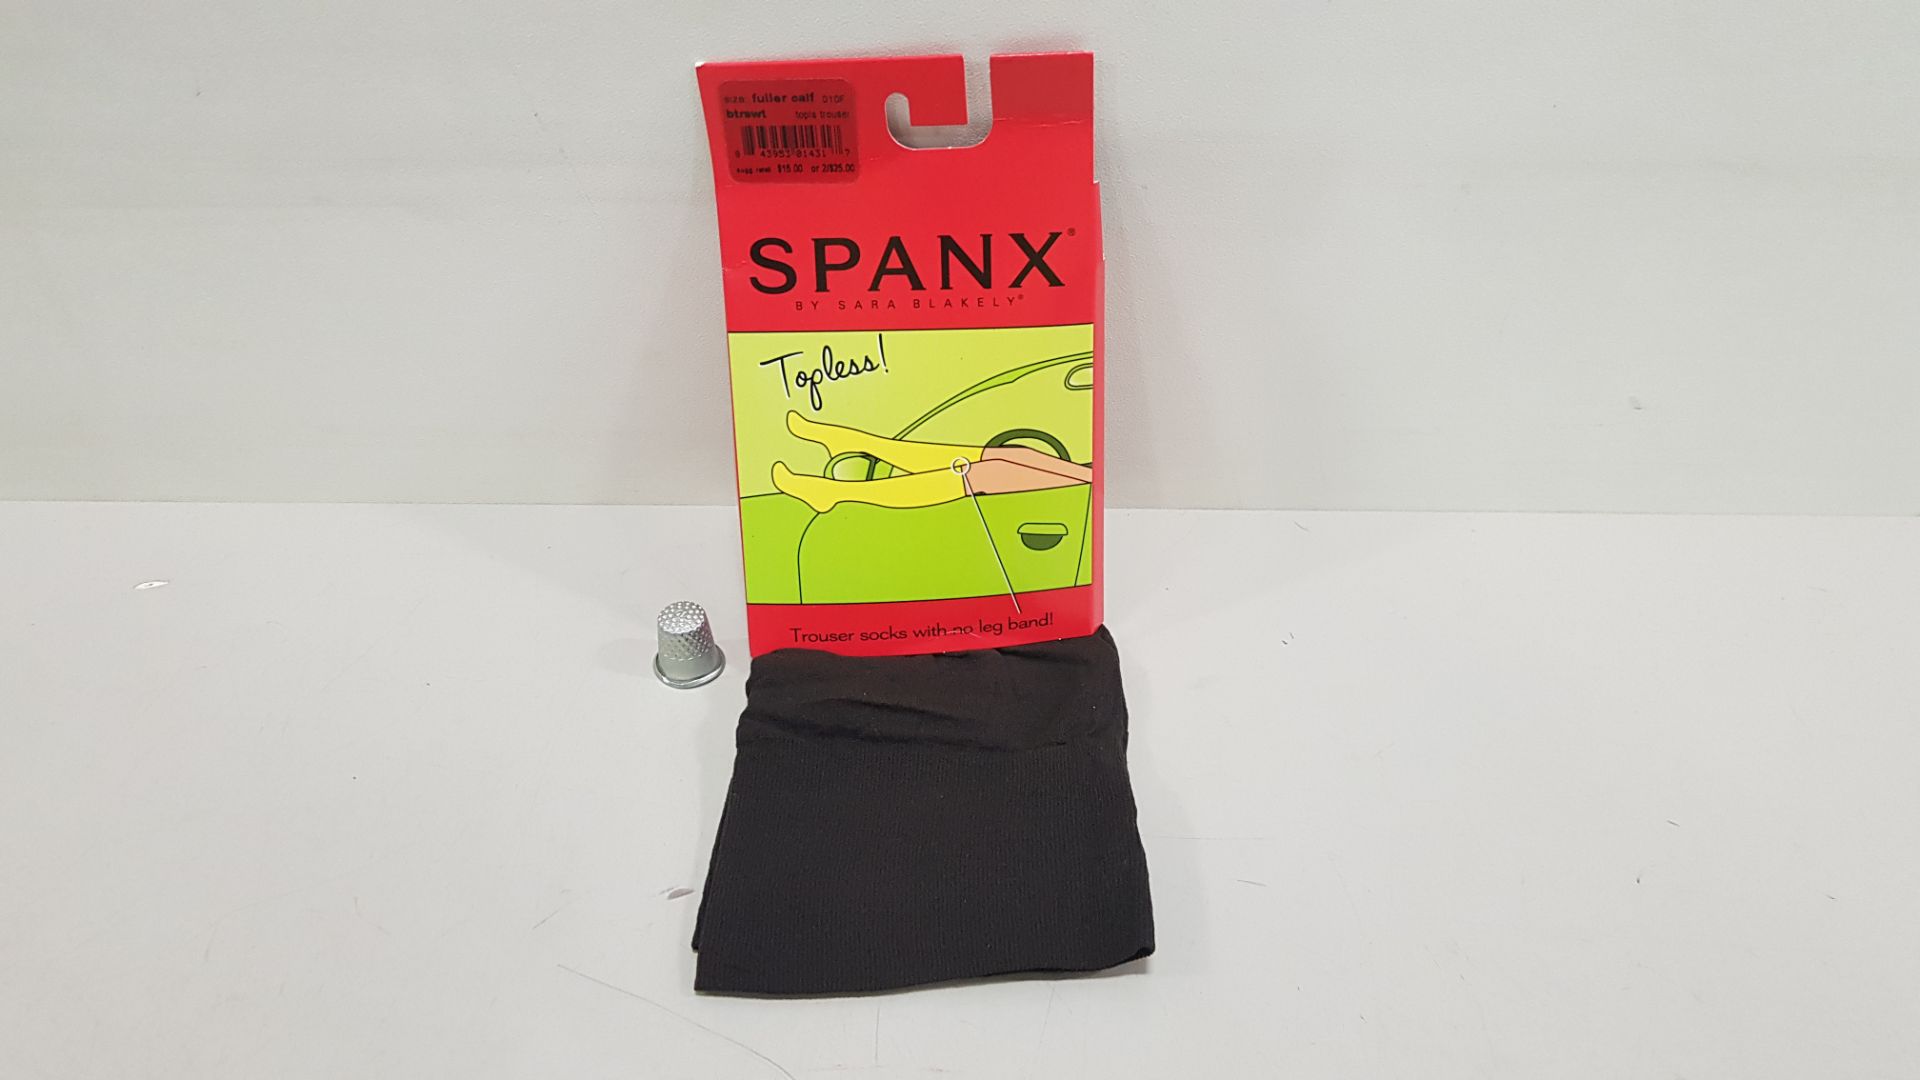 40 X BRAND NEW SPANX TOPLESS TROUSER SOCKS WITH NO LEG BAND RRP-$15.00 TOTAL RRP-$600.00